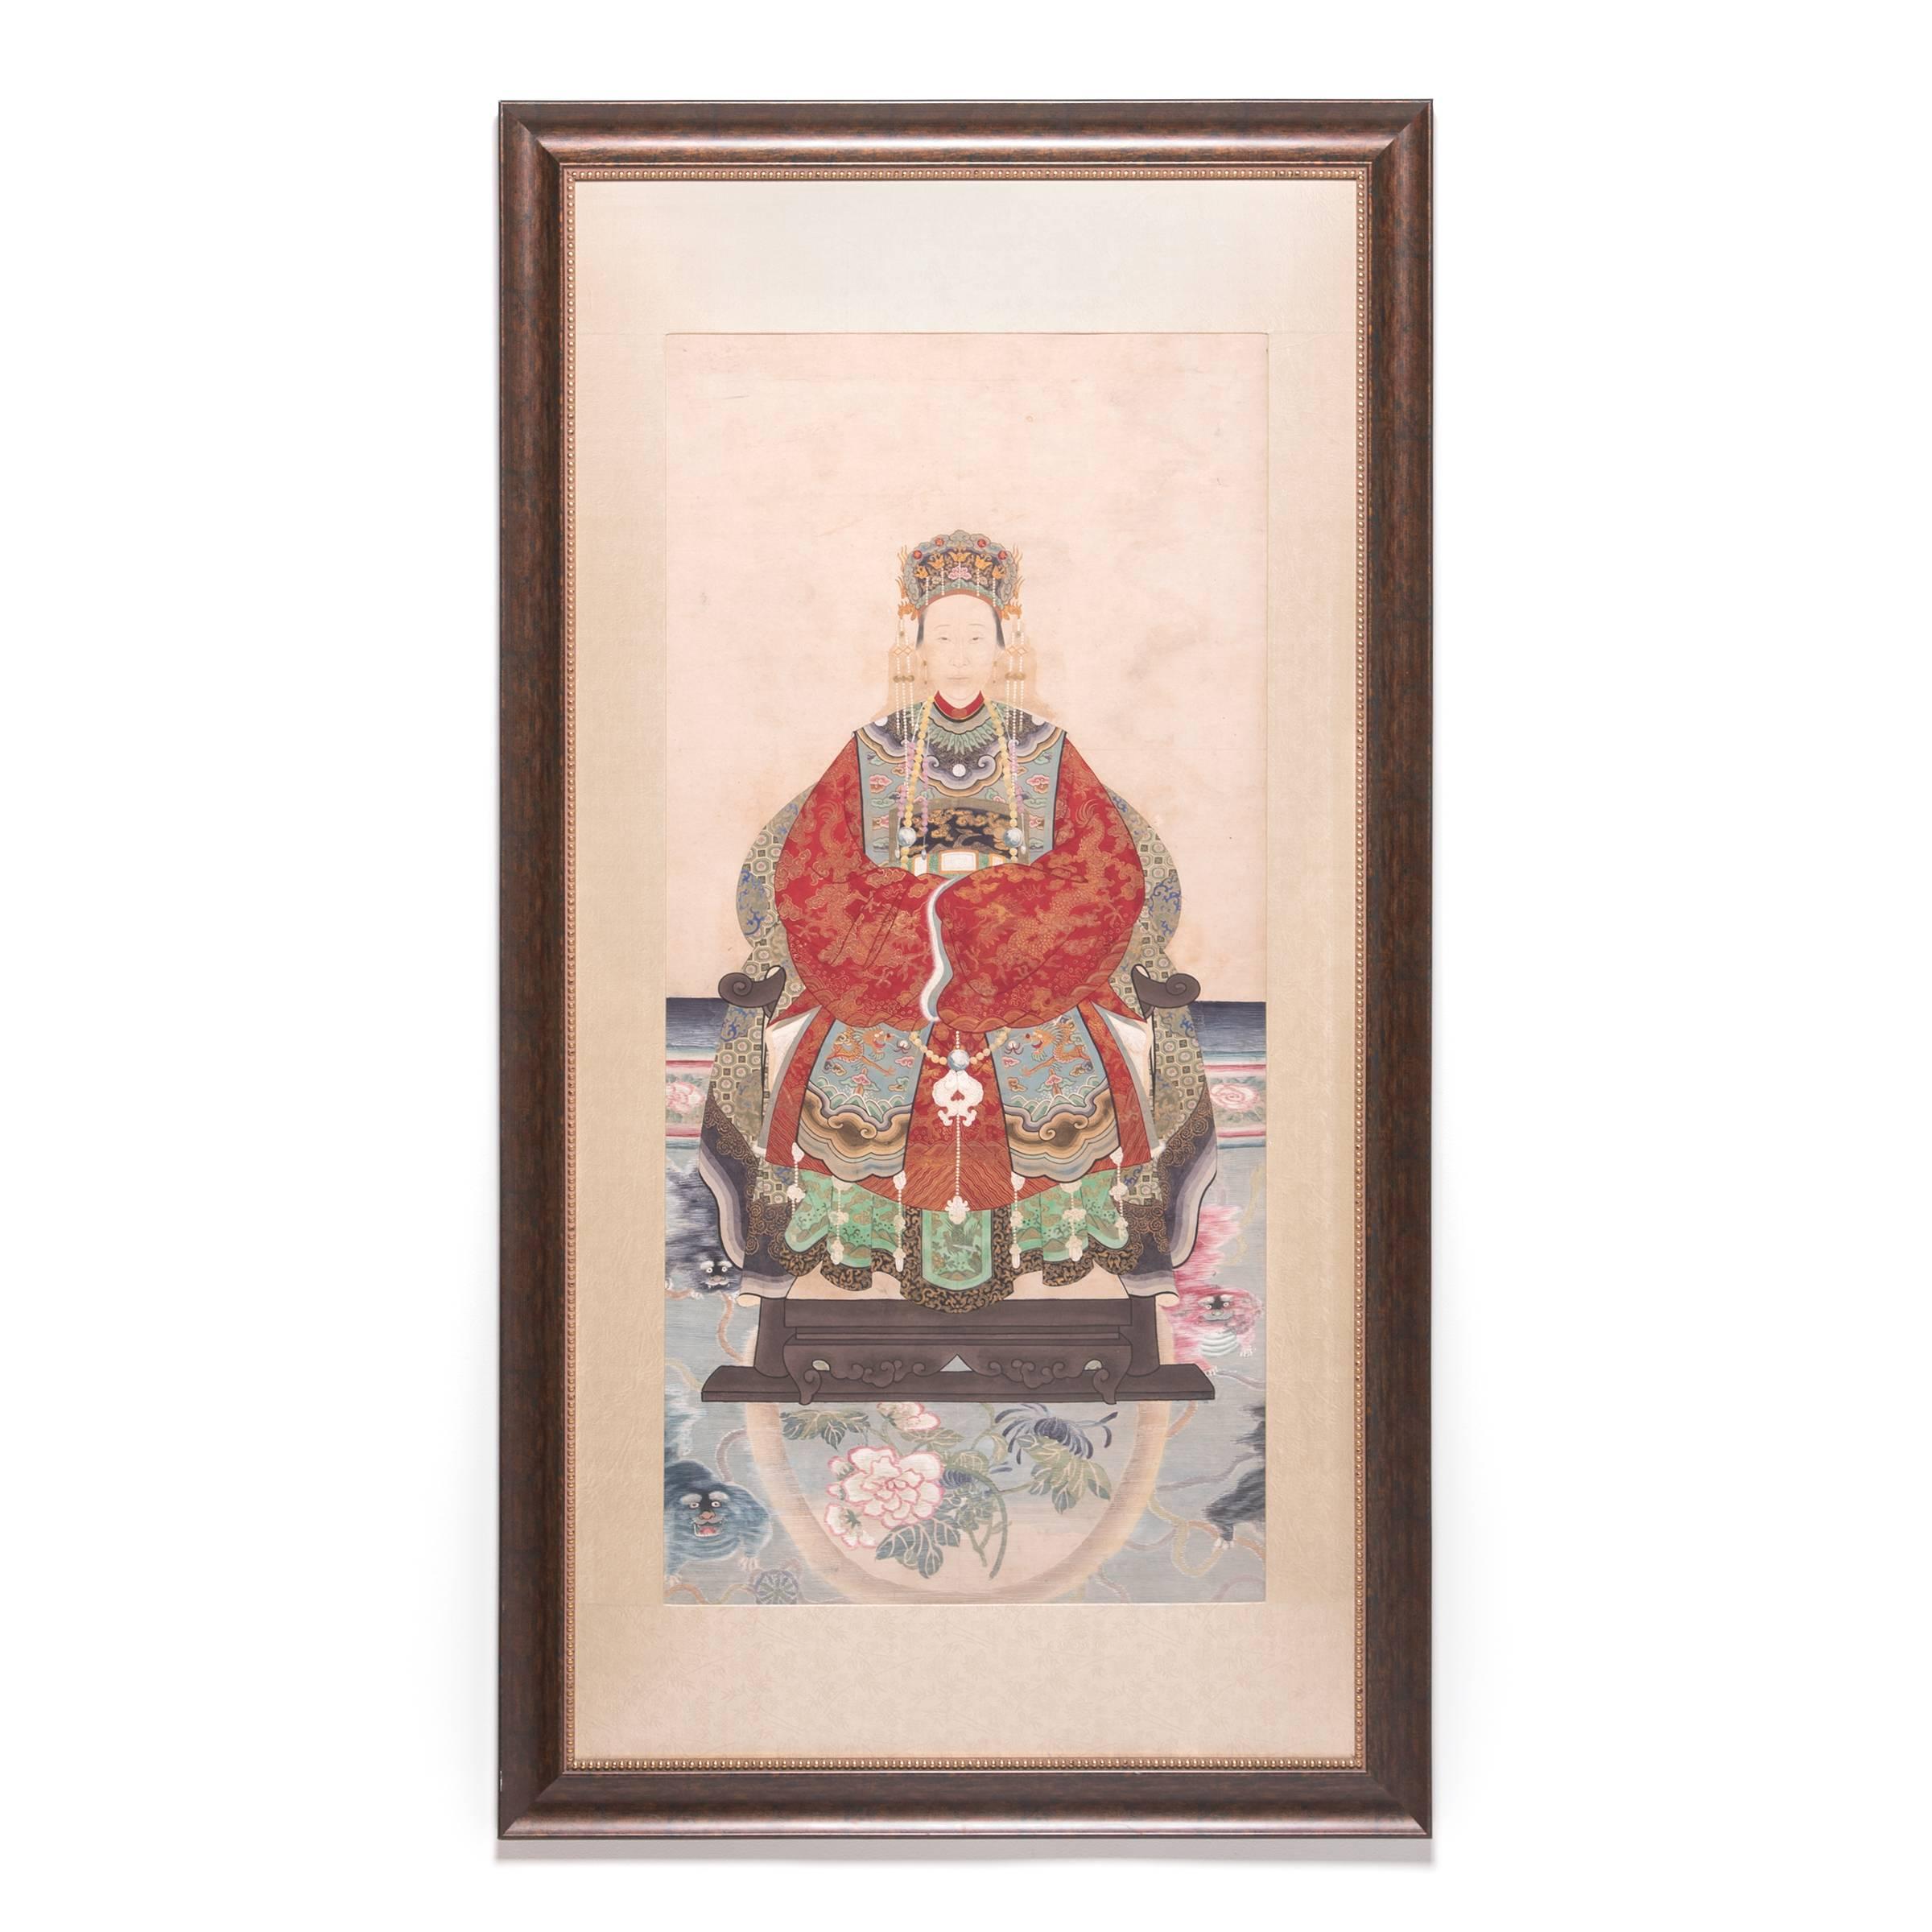 Believing that the departed continue to hold influence over the lives of the living, many Chinese households honour their ancestors in private family rituals, invoking their spirits for long life, health, and prosperity. Commemorative portraits,